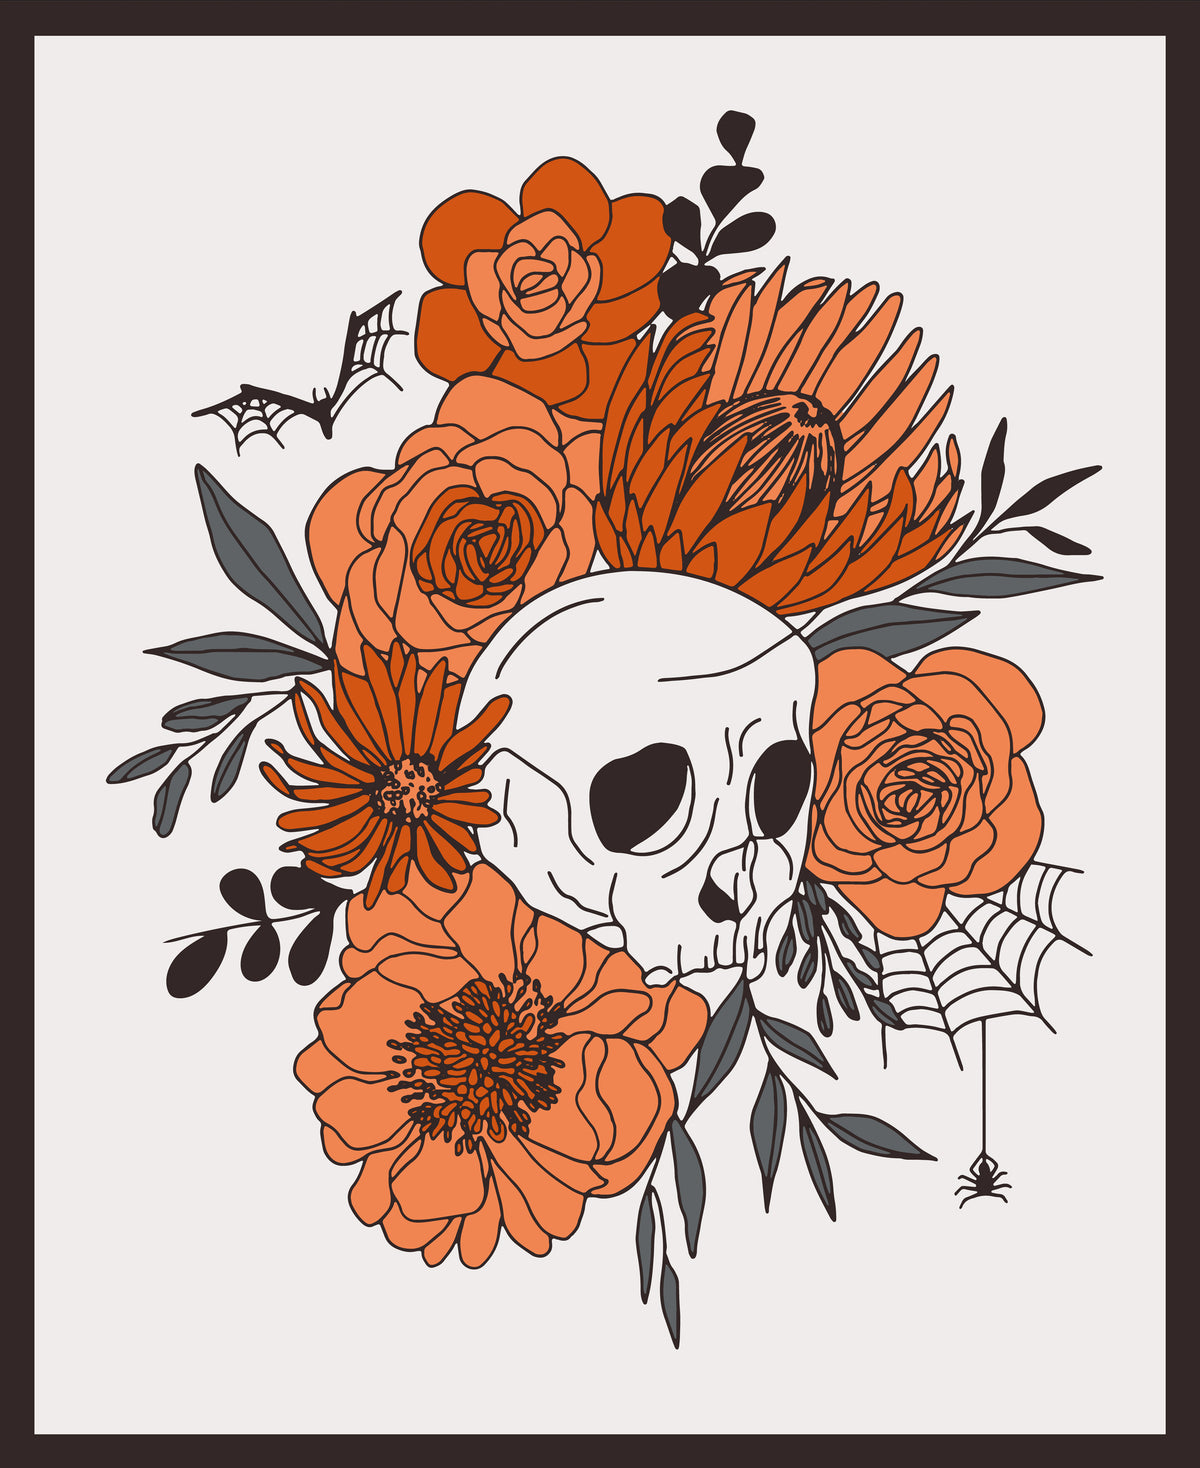 Noir Quilt Fabric - Skull Panel in Ghost White/Pumpkin Orange - 11548 11 - SOLD AS A 36" PANEL